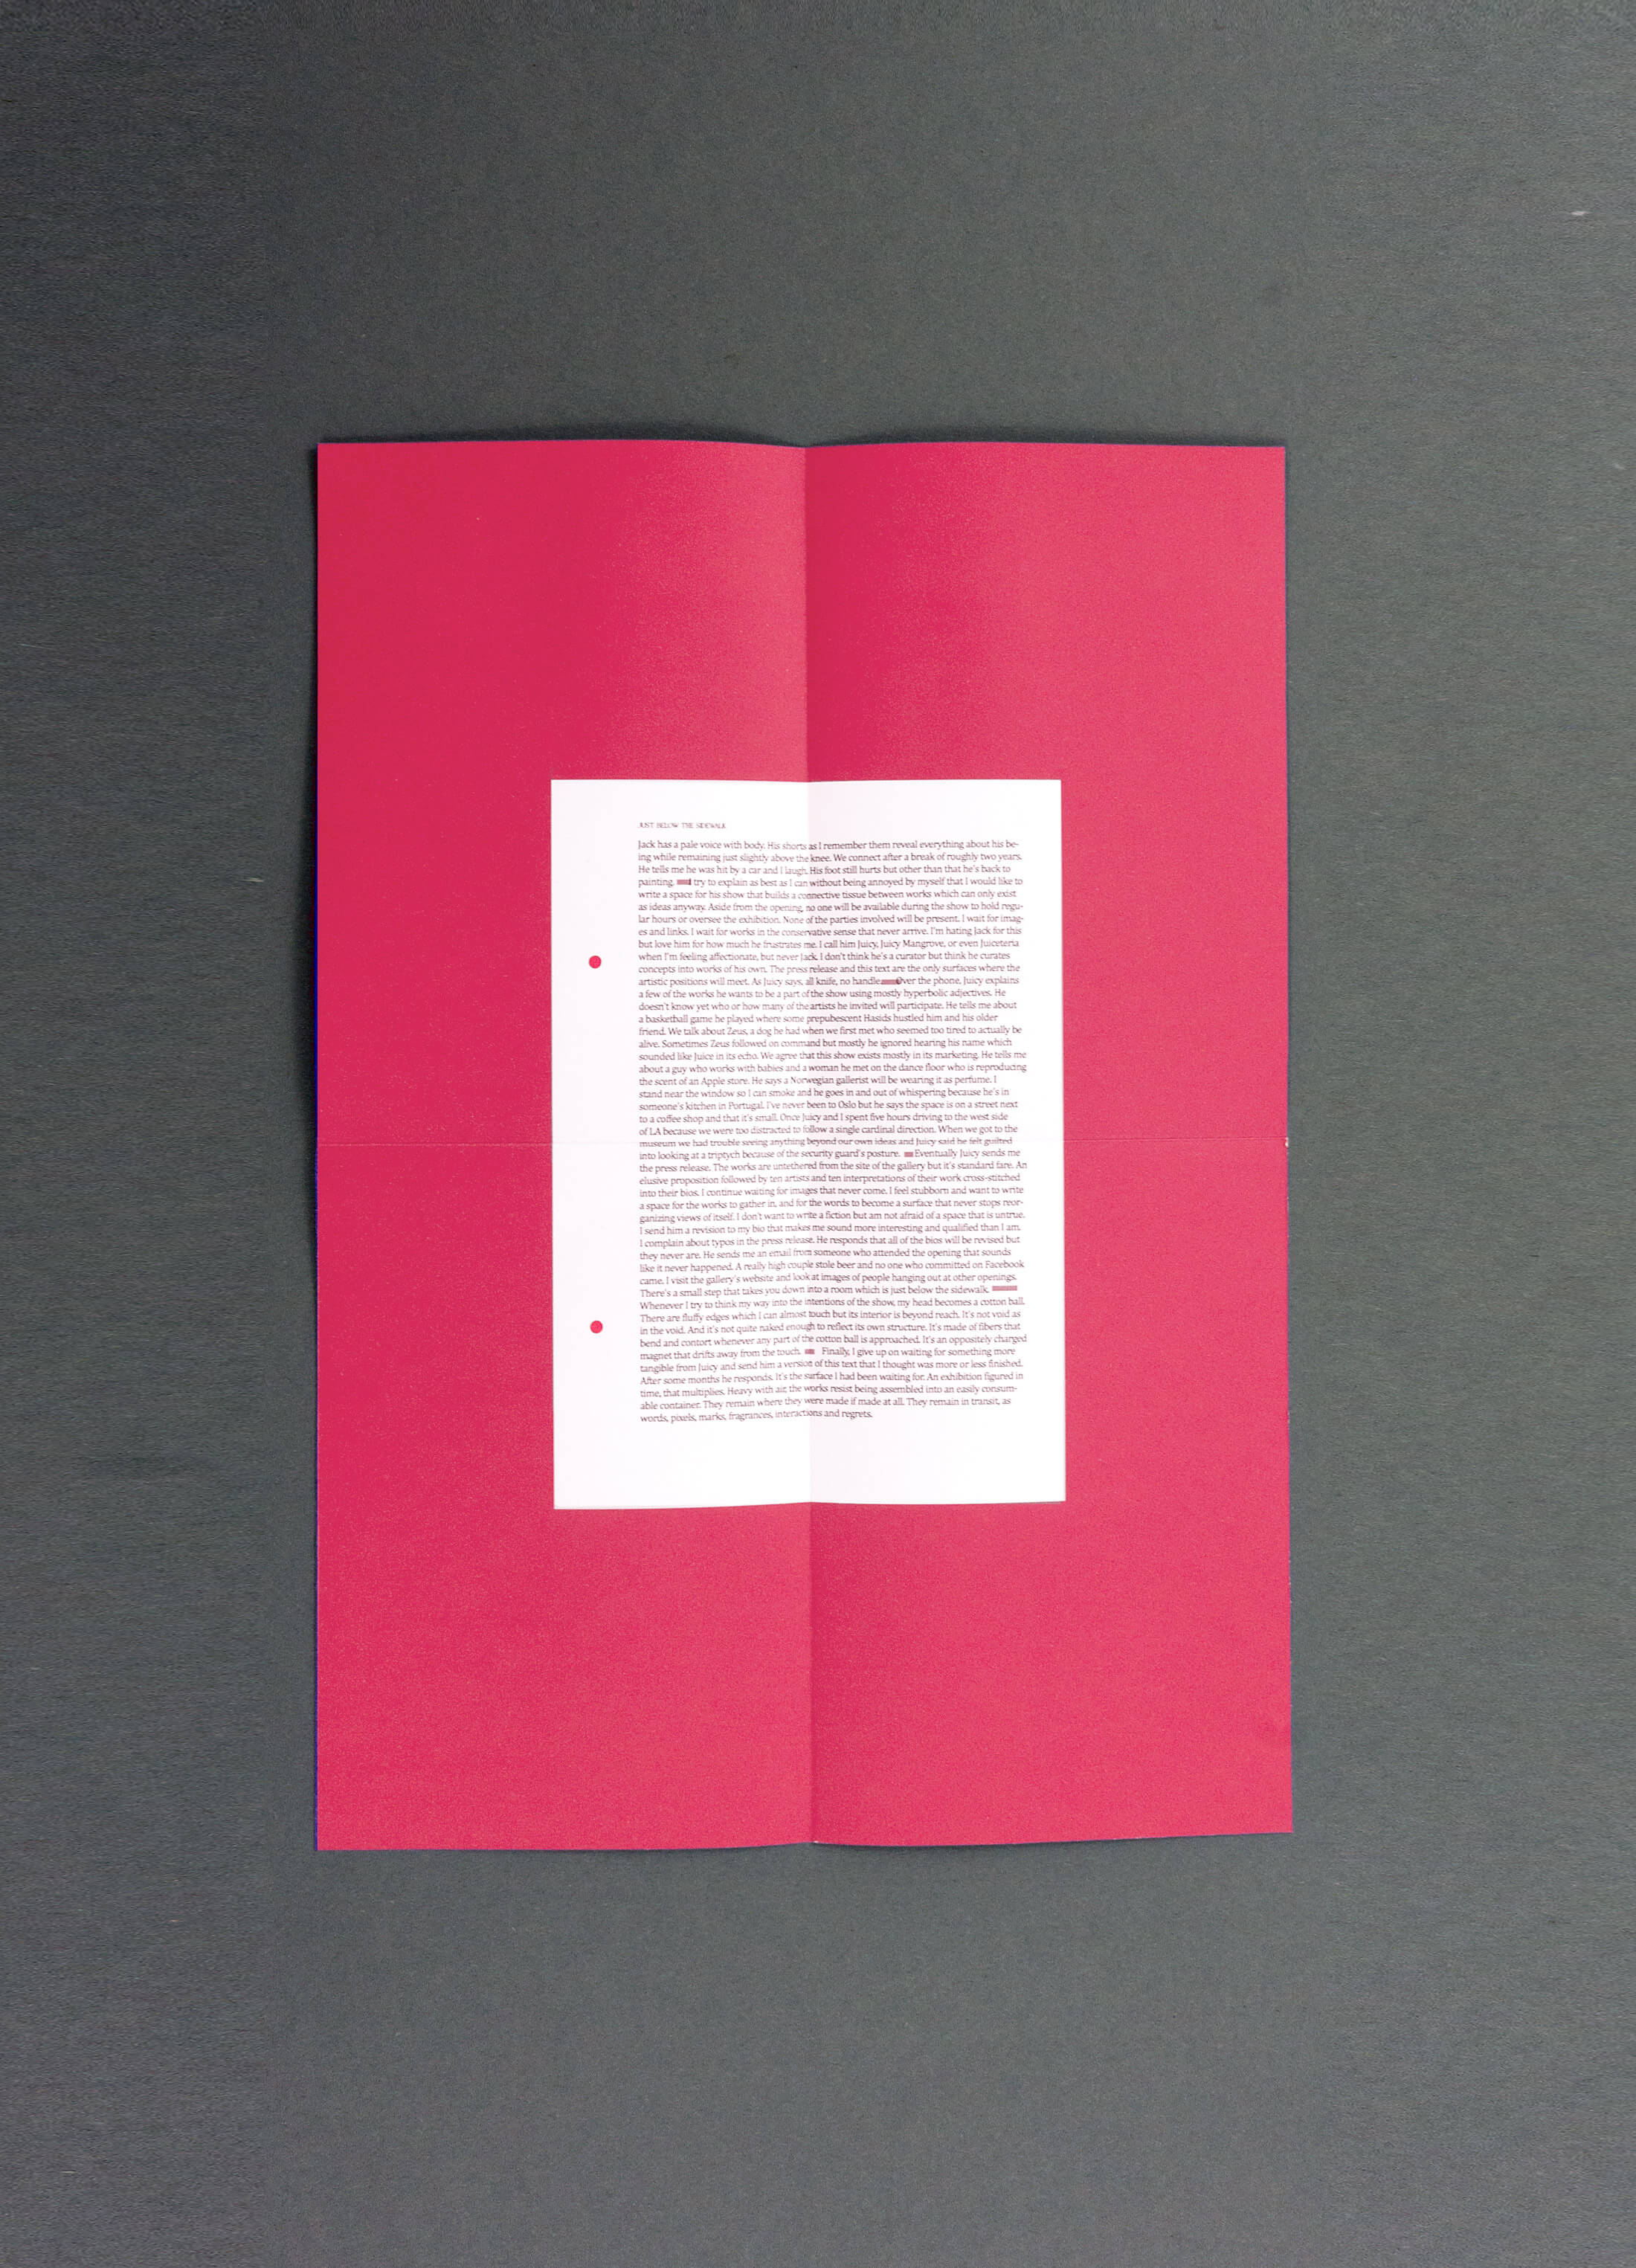 Folded piece of magenta paper with text on printed on it.